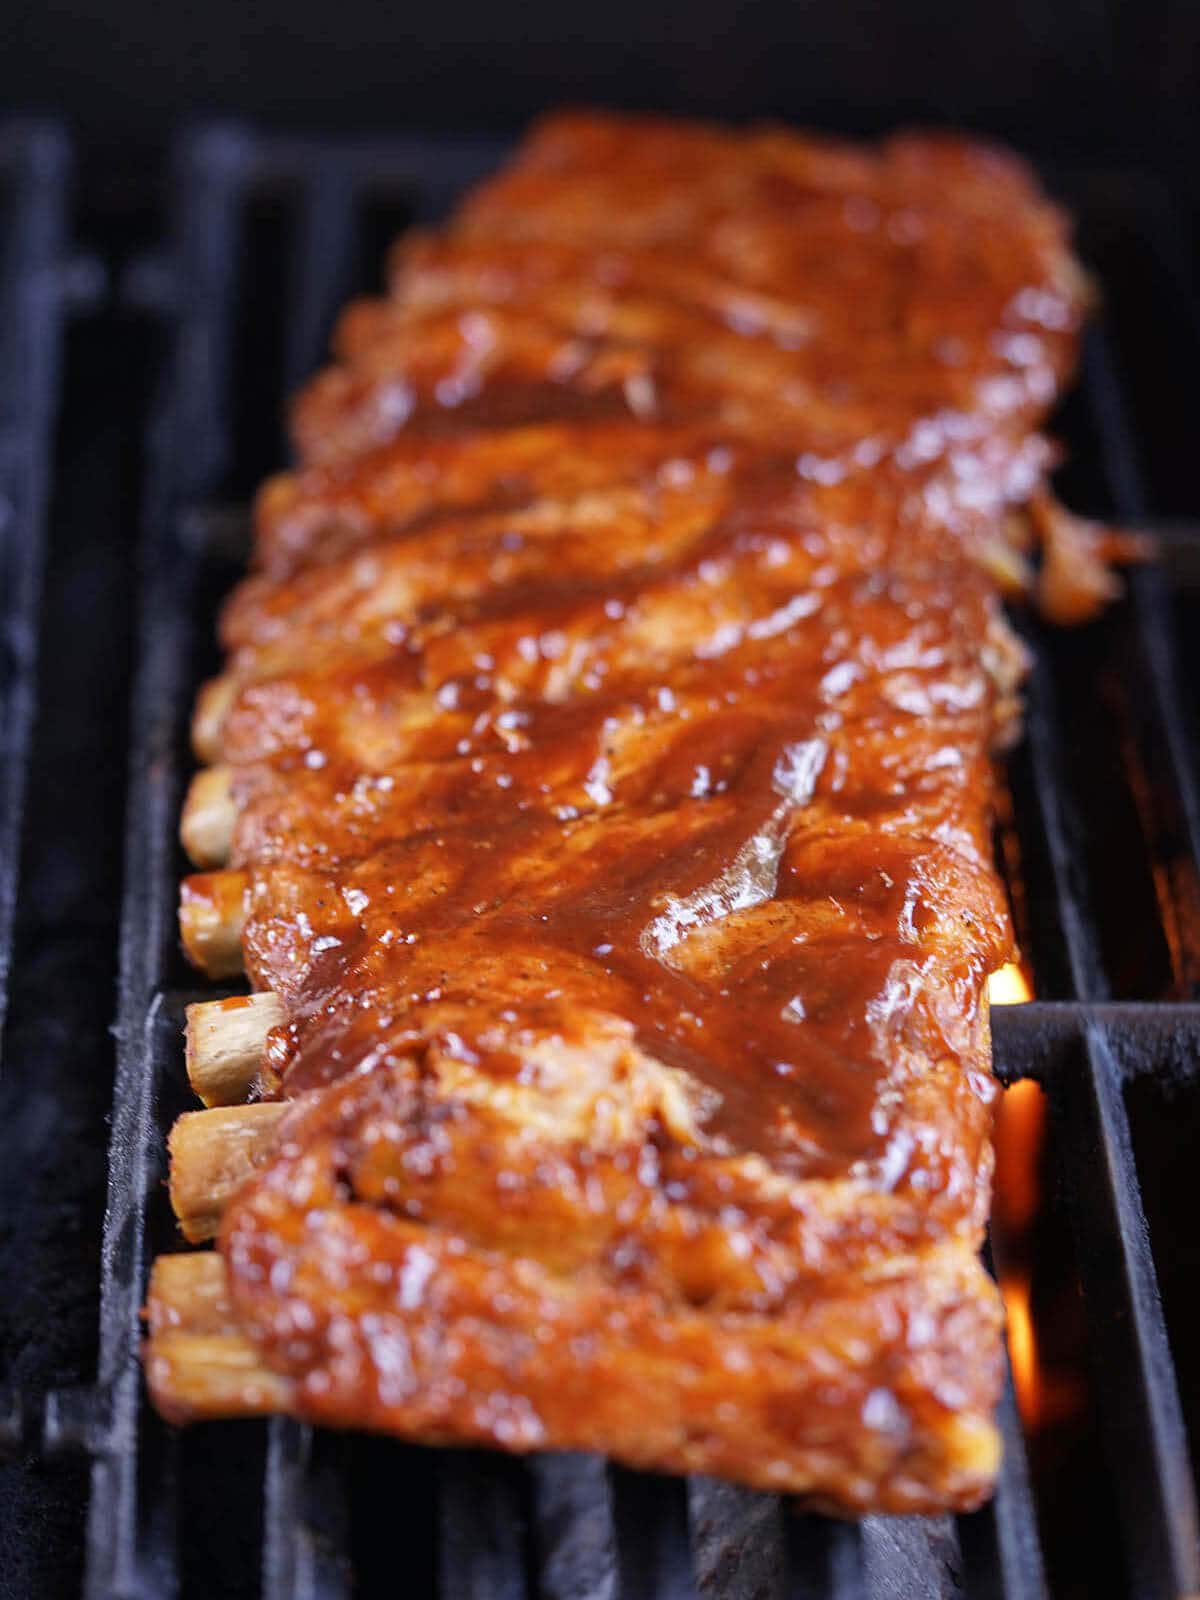 Cooked ribs on the grill slathered with sauce.